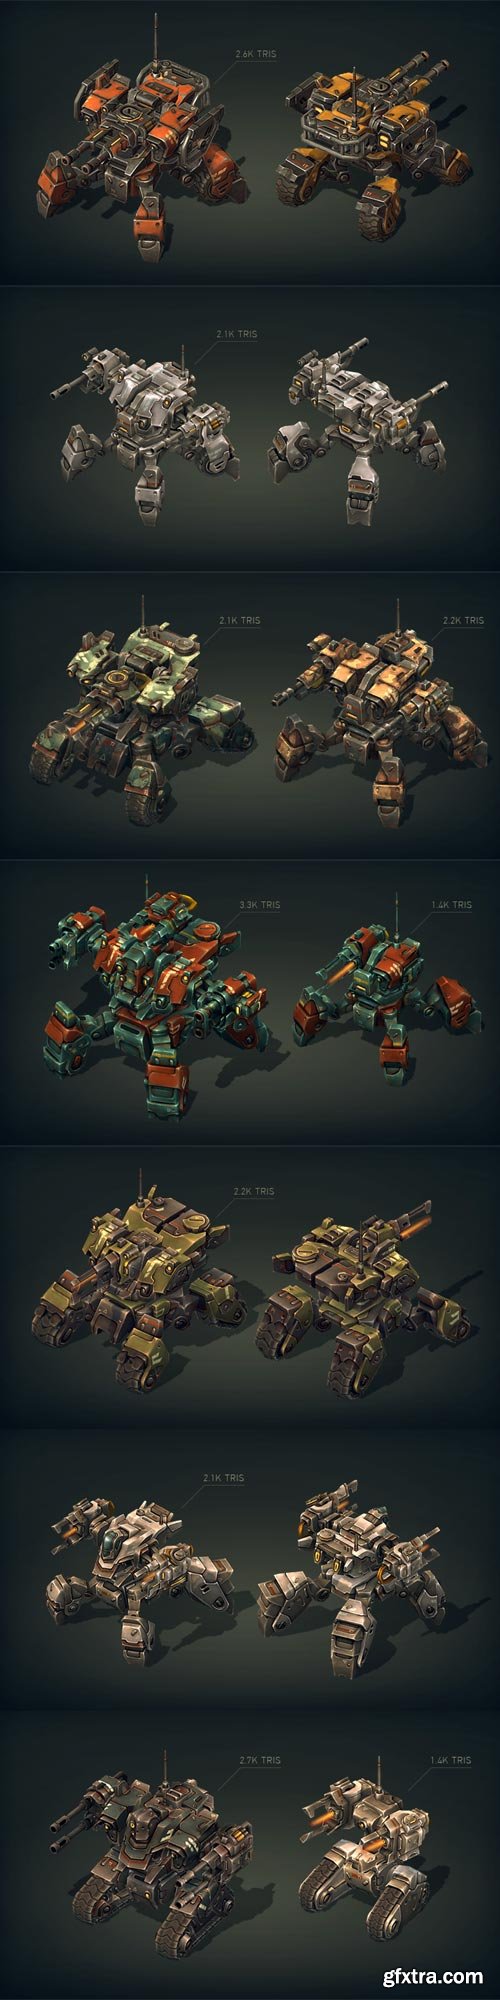 Cube Brush - Mech Constructor: Spiders and Tanks